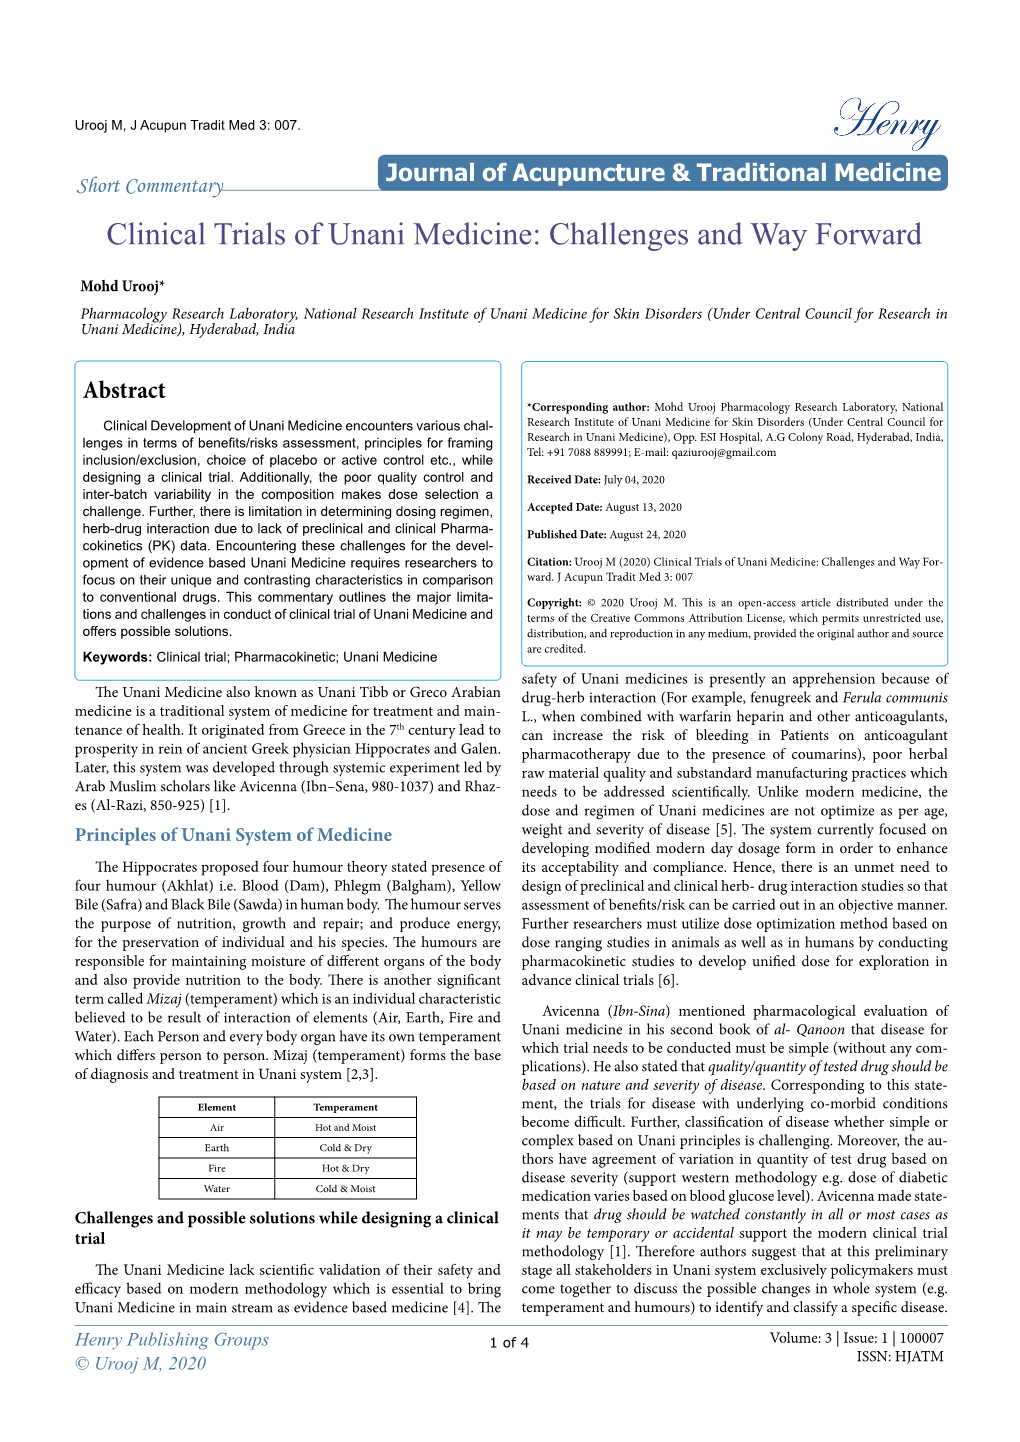 Clinical Trials of Unani Medicine: Challenges and Way Forward